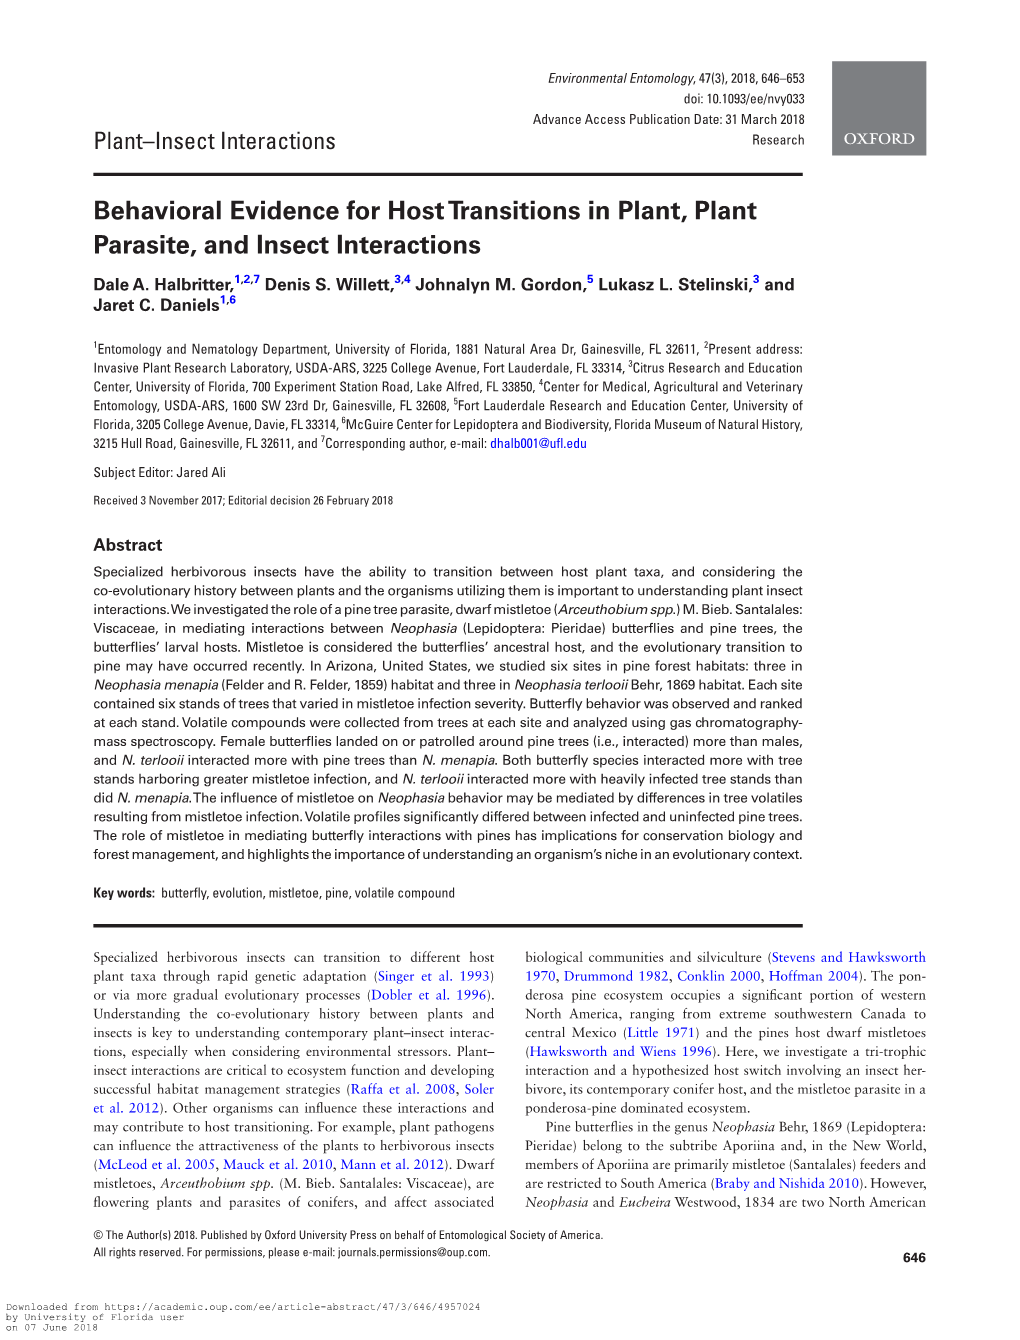 Behavioral Evidence for Host Transitions in Plant, Plant Parasite, and Insect Interactions